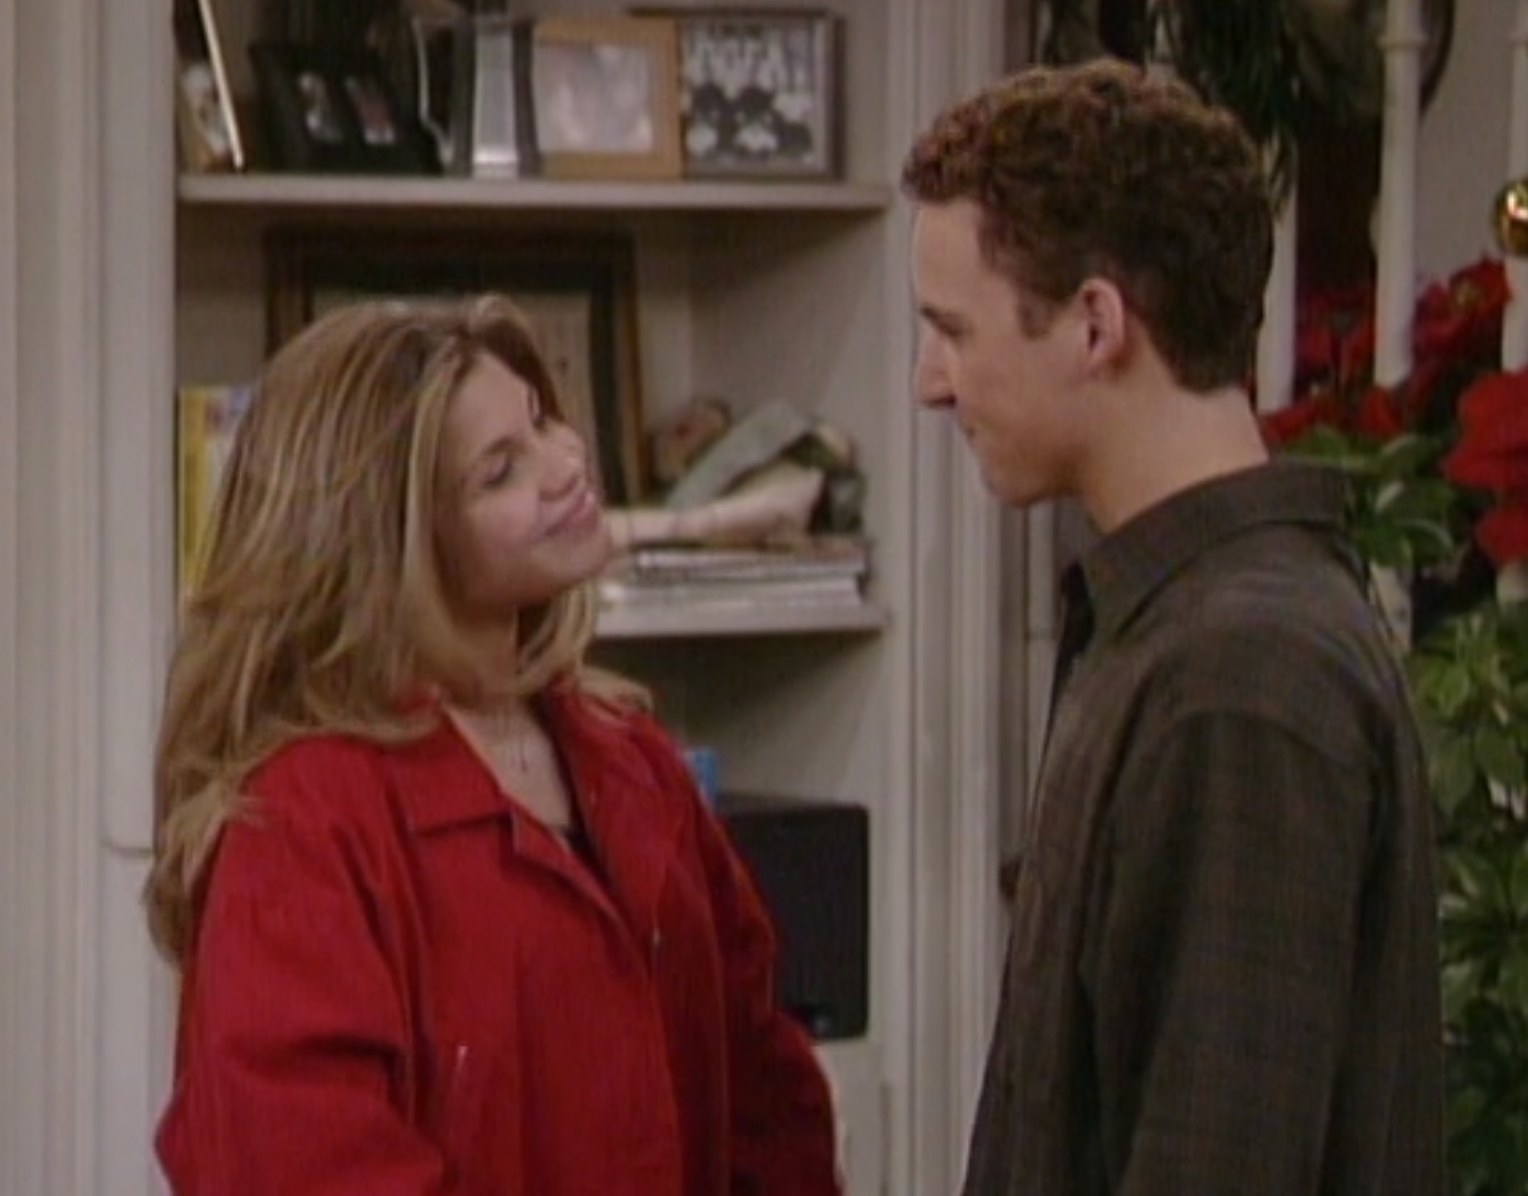 Topanga and Cory celebrate the holidays in &quot;Boy Meets World&quot; episode, &quot;A Very Topanga Christmas&quot;